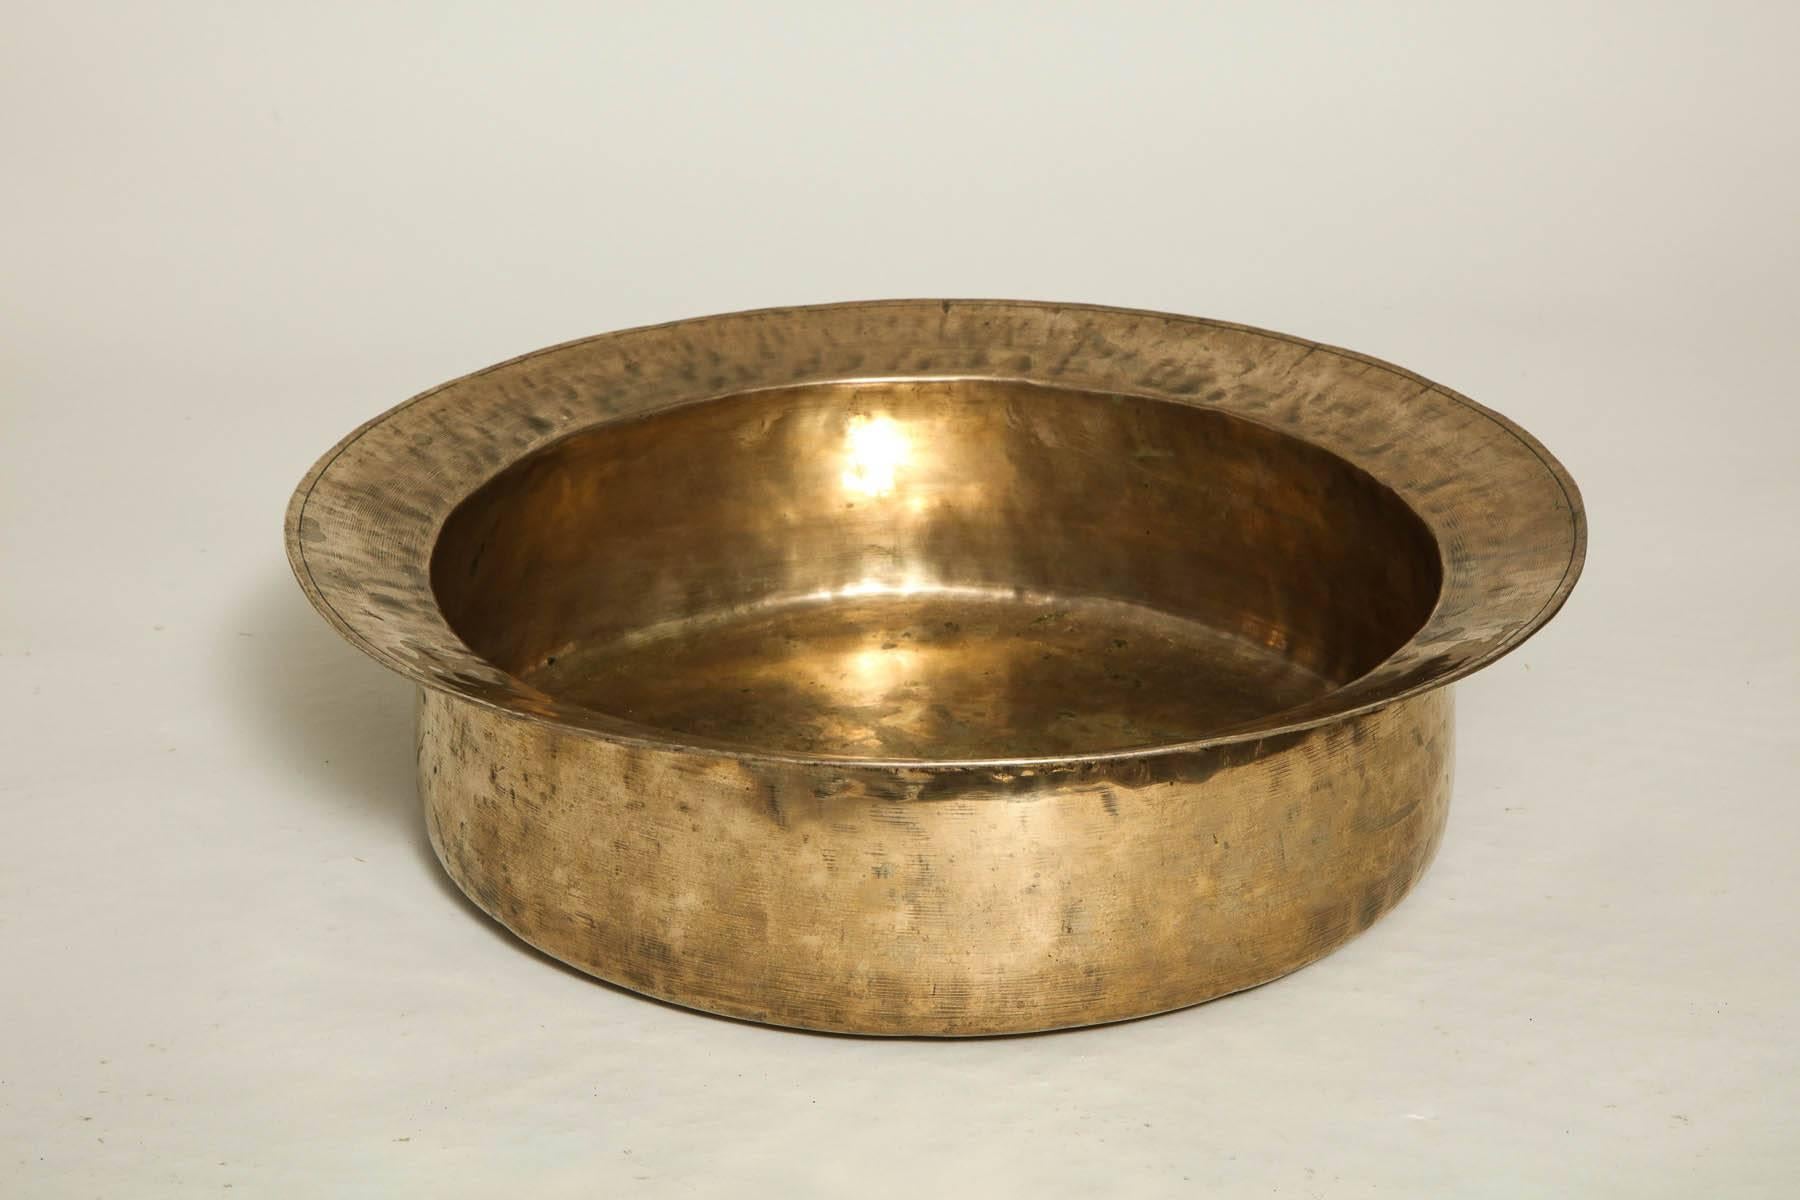 Fine 18th century English spun and hammered brass dairy bowl with rolled edge, deep basin and lovely surface.